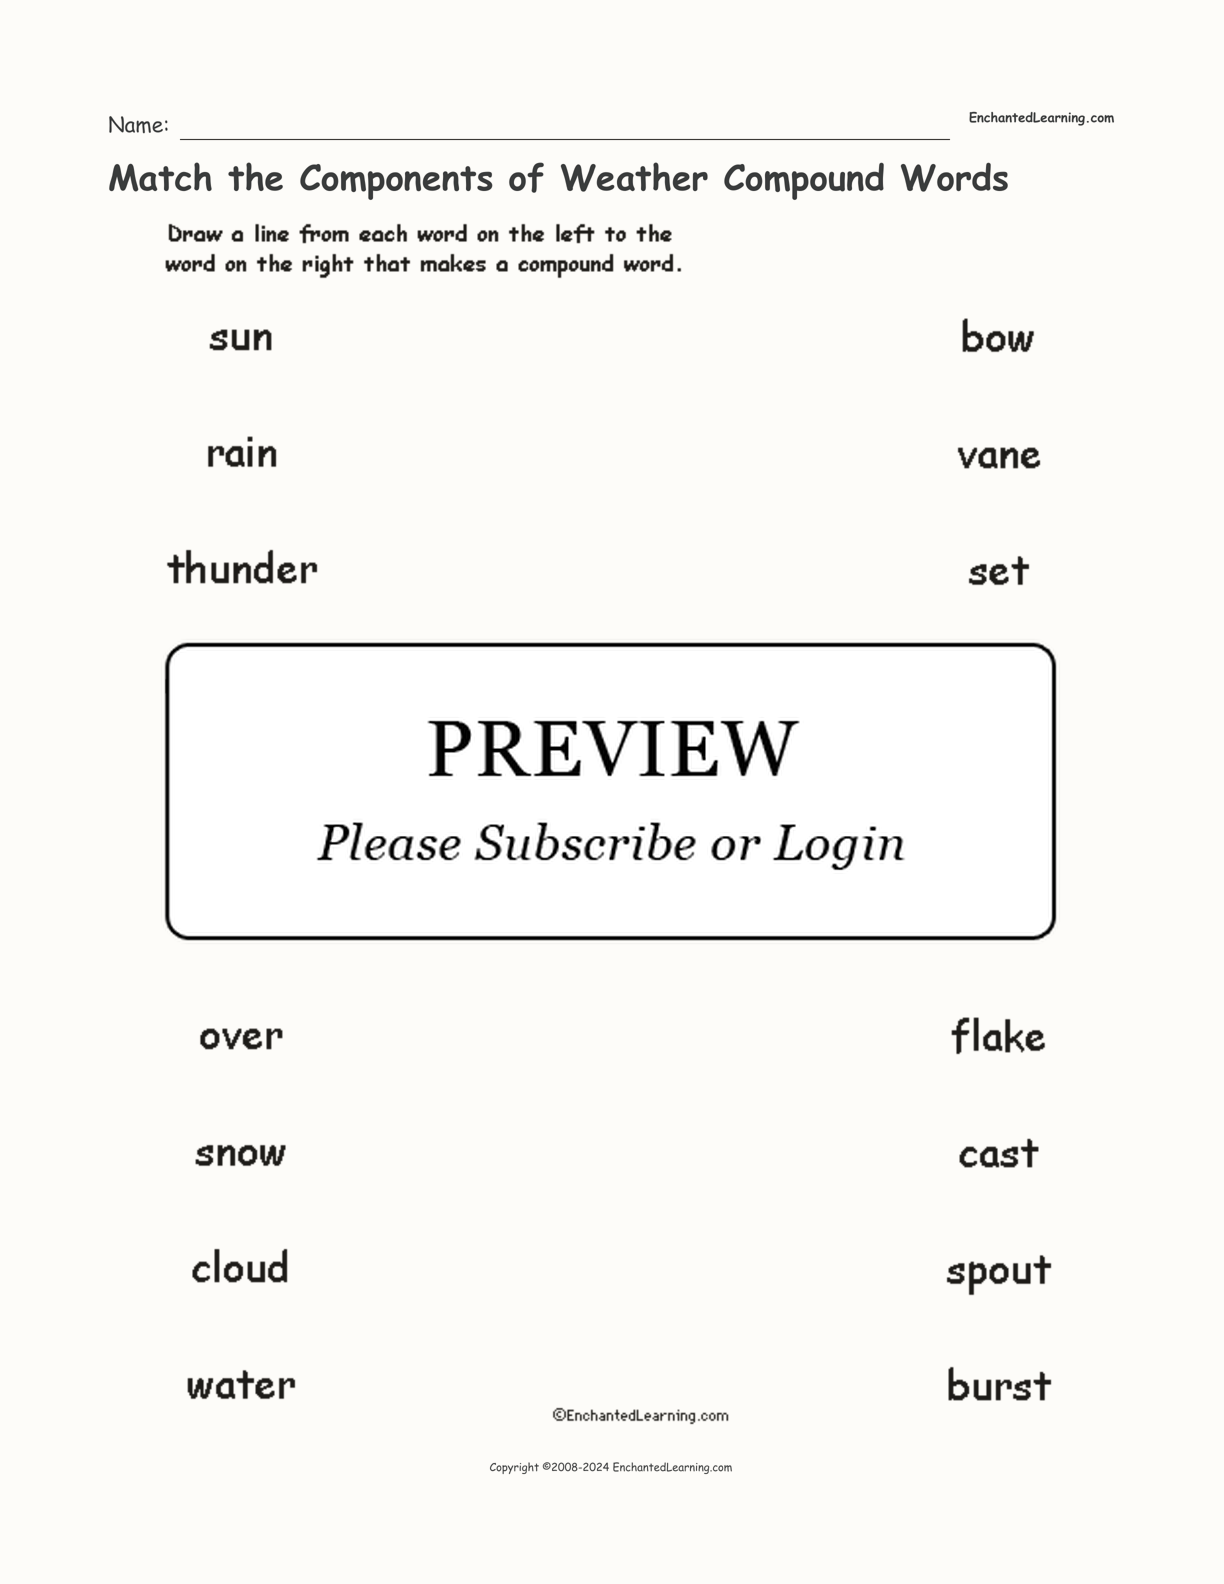 Match the Components of Weather Compound Words interactive worksheet page 1